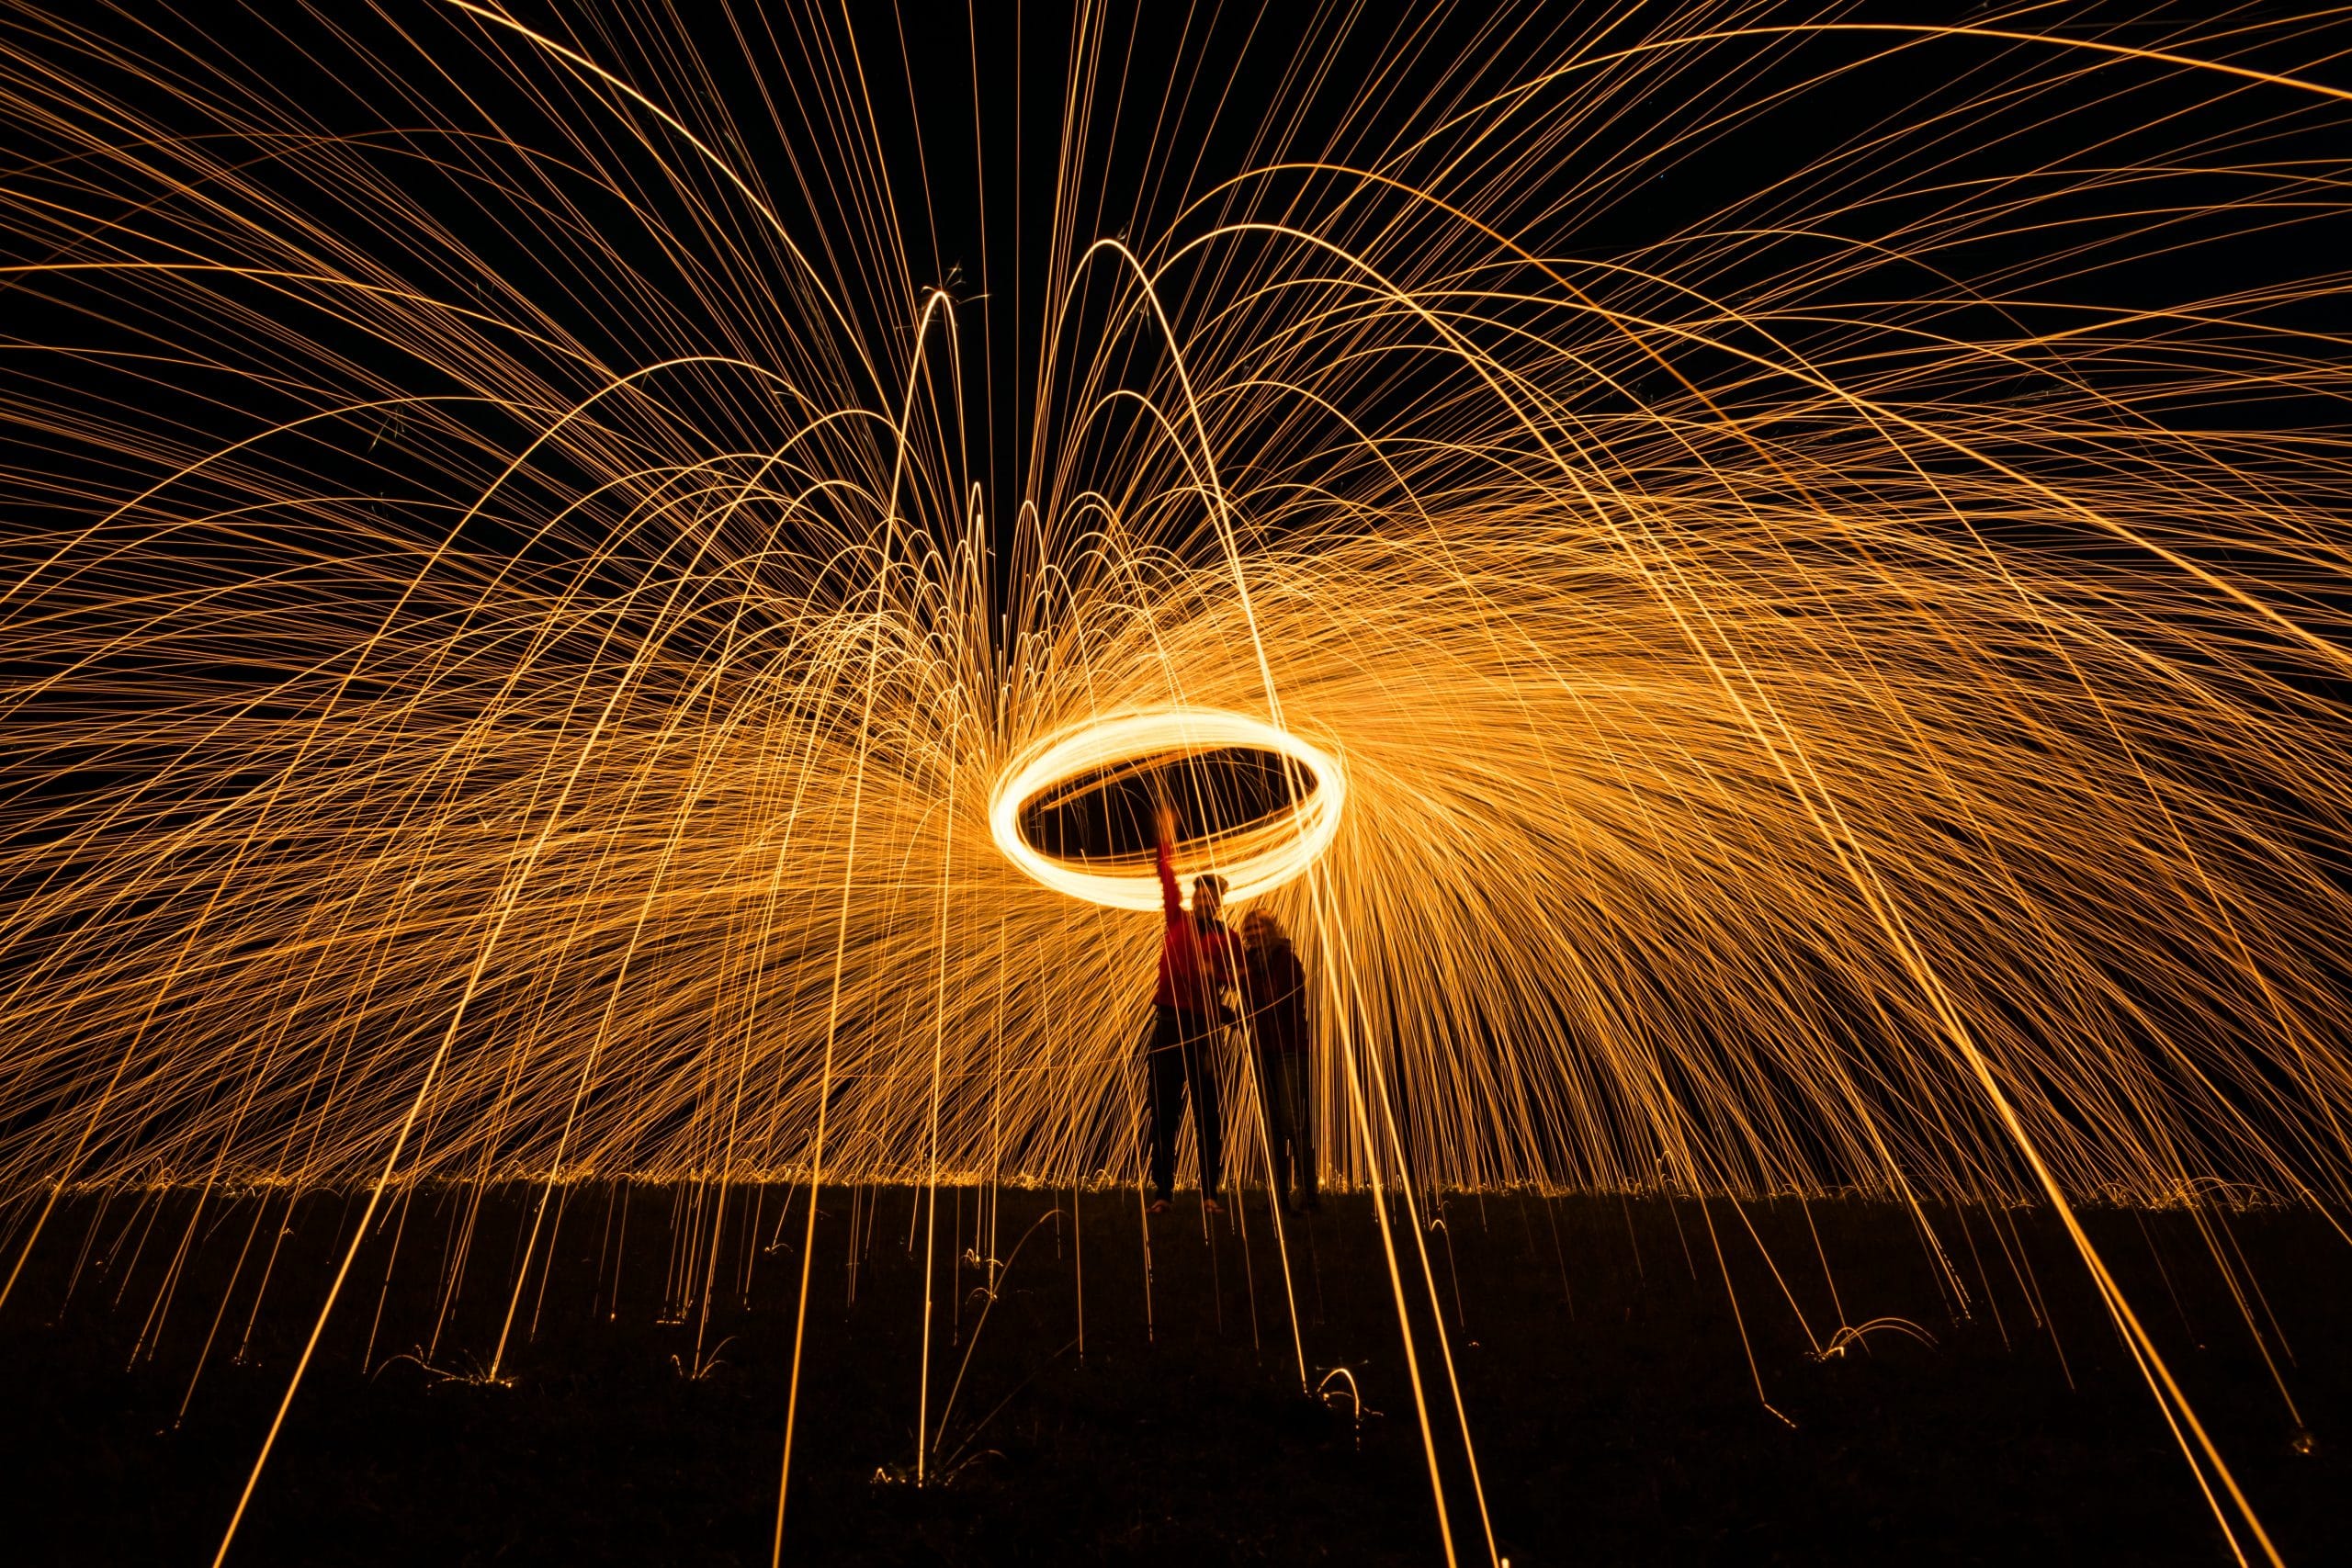 Two people holding up a large sparkler.